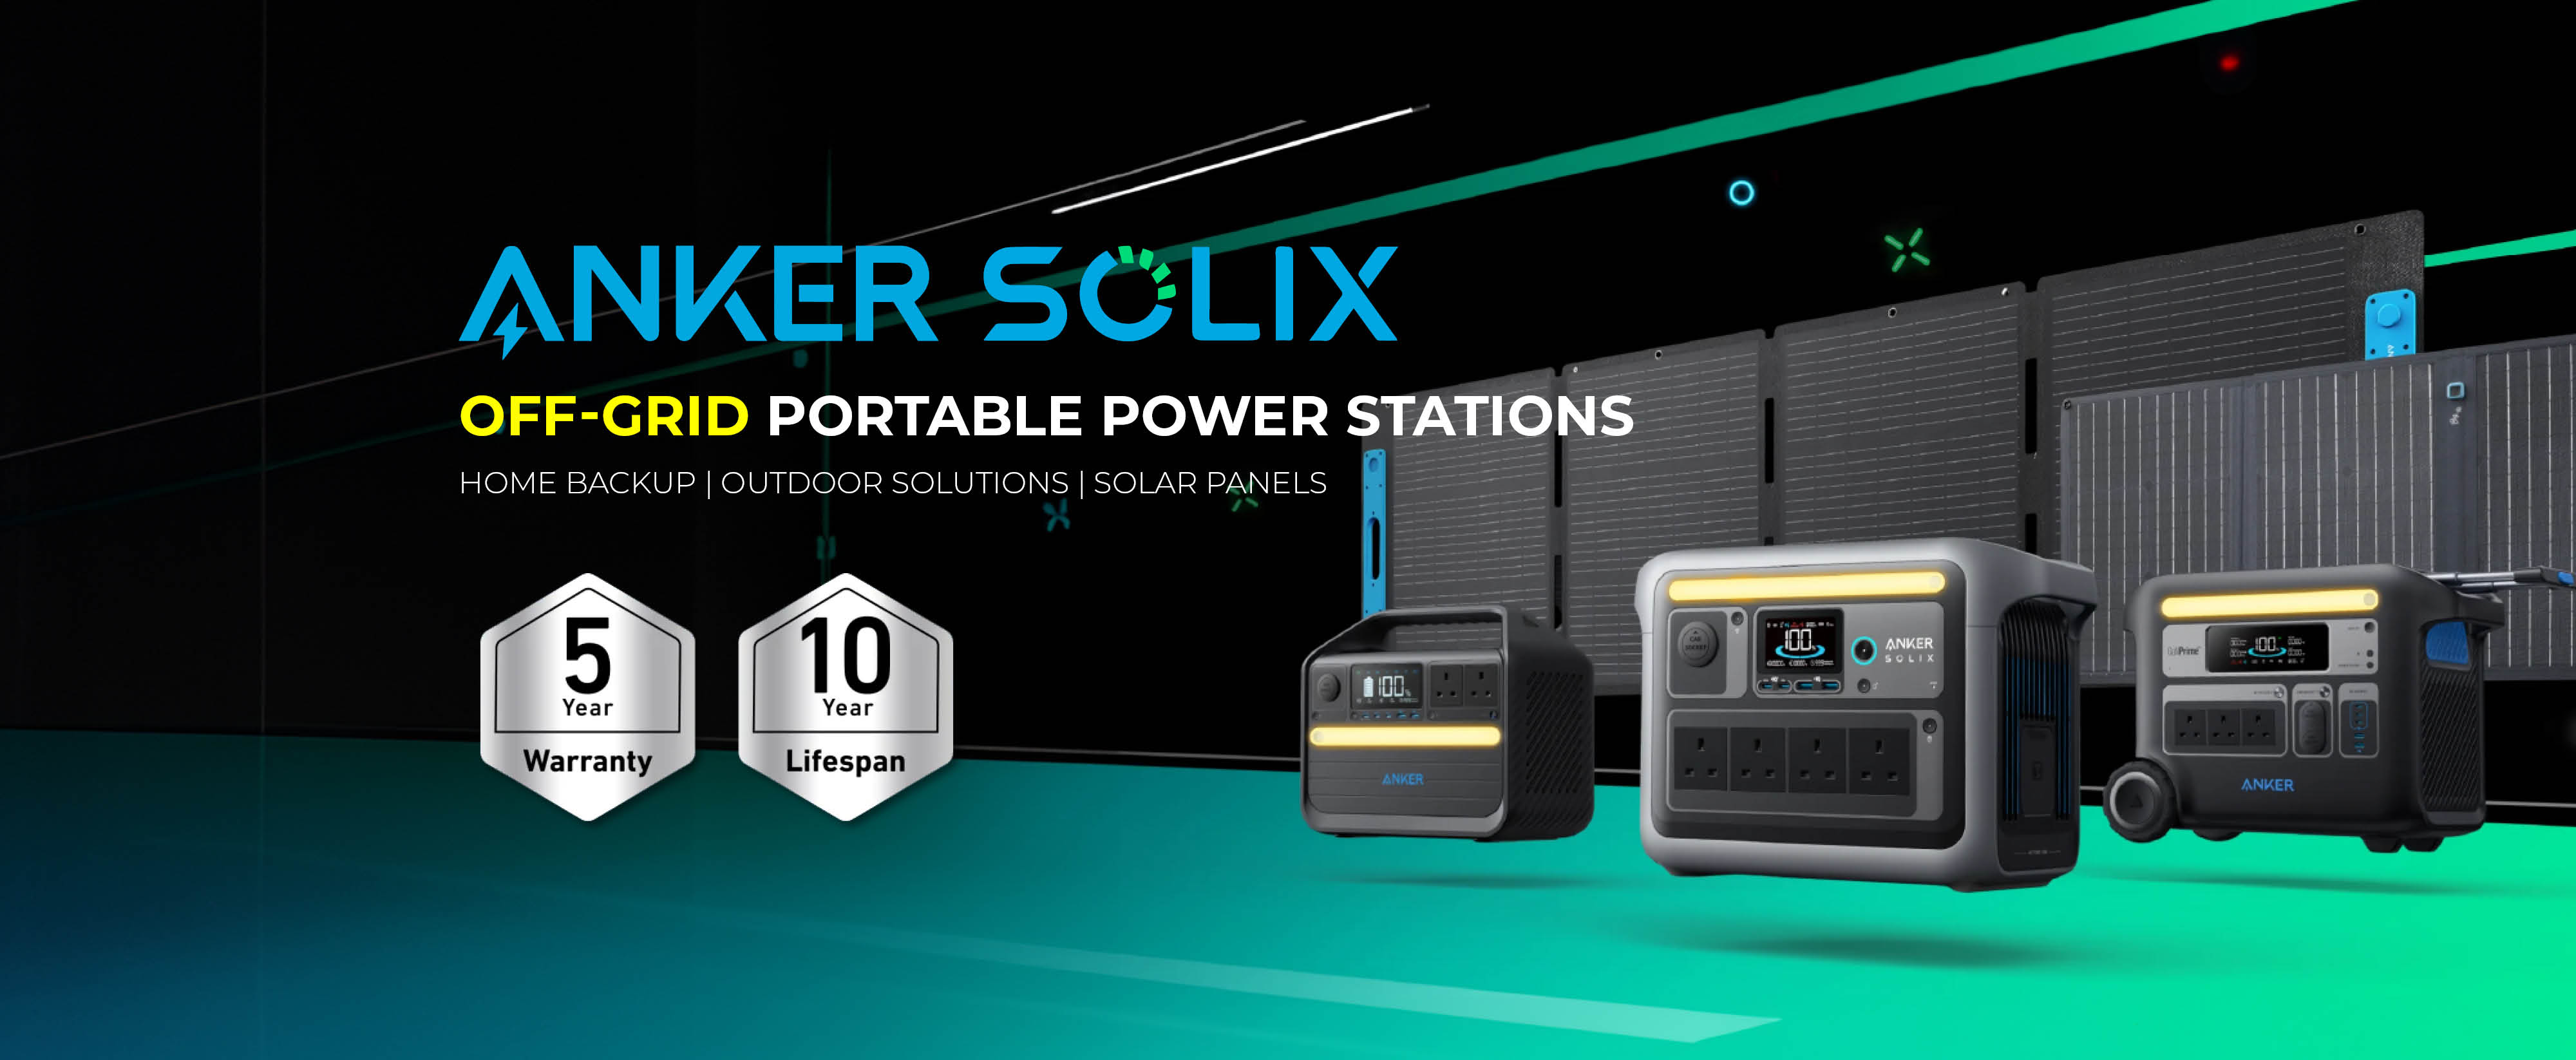 Anker Solix Off Grid Portable Power Stations